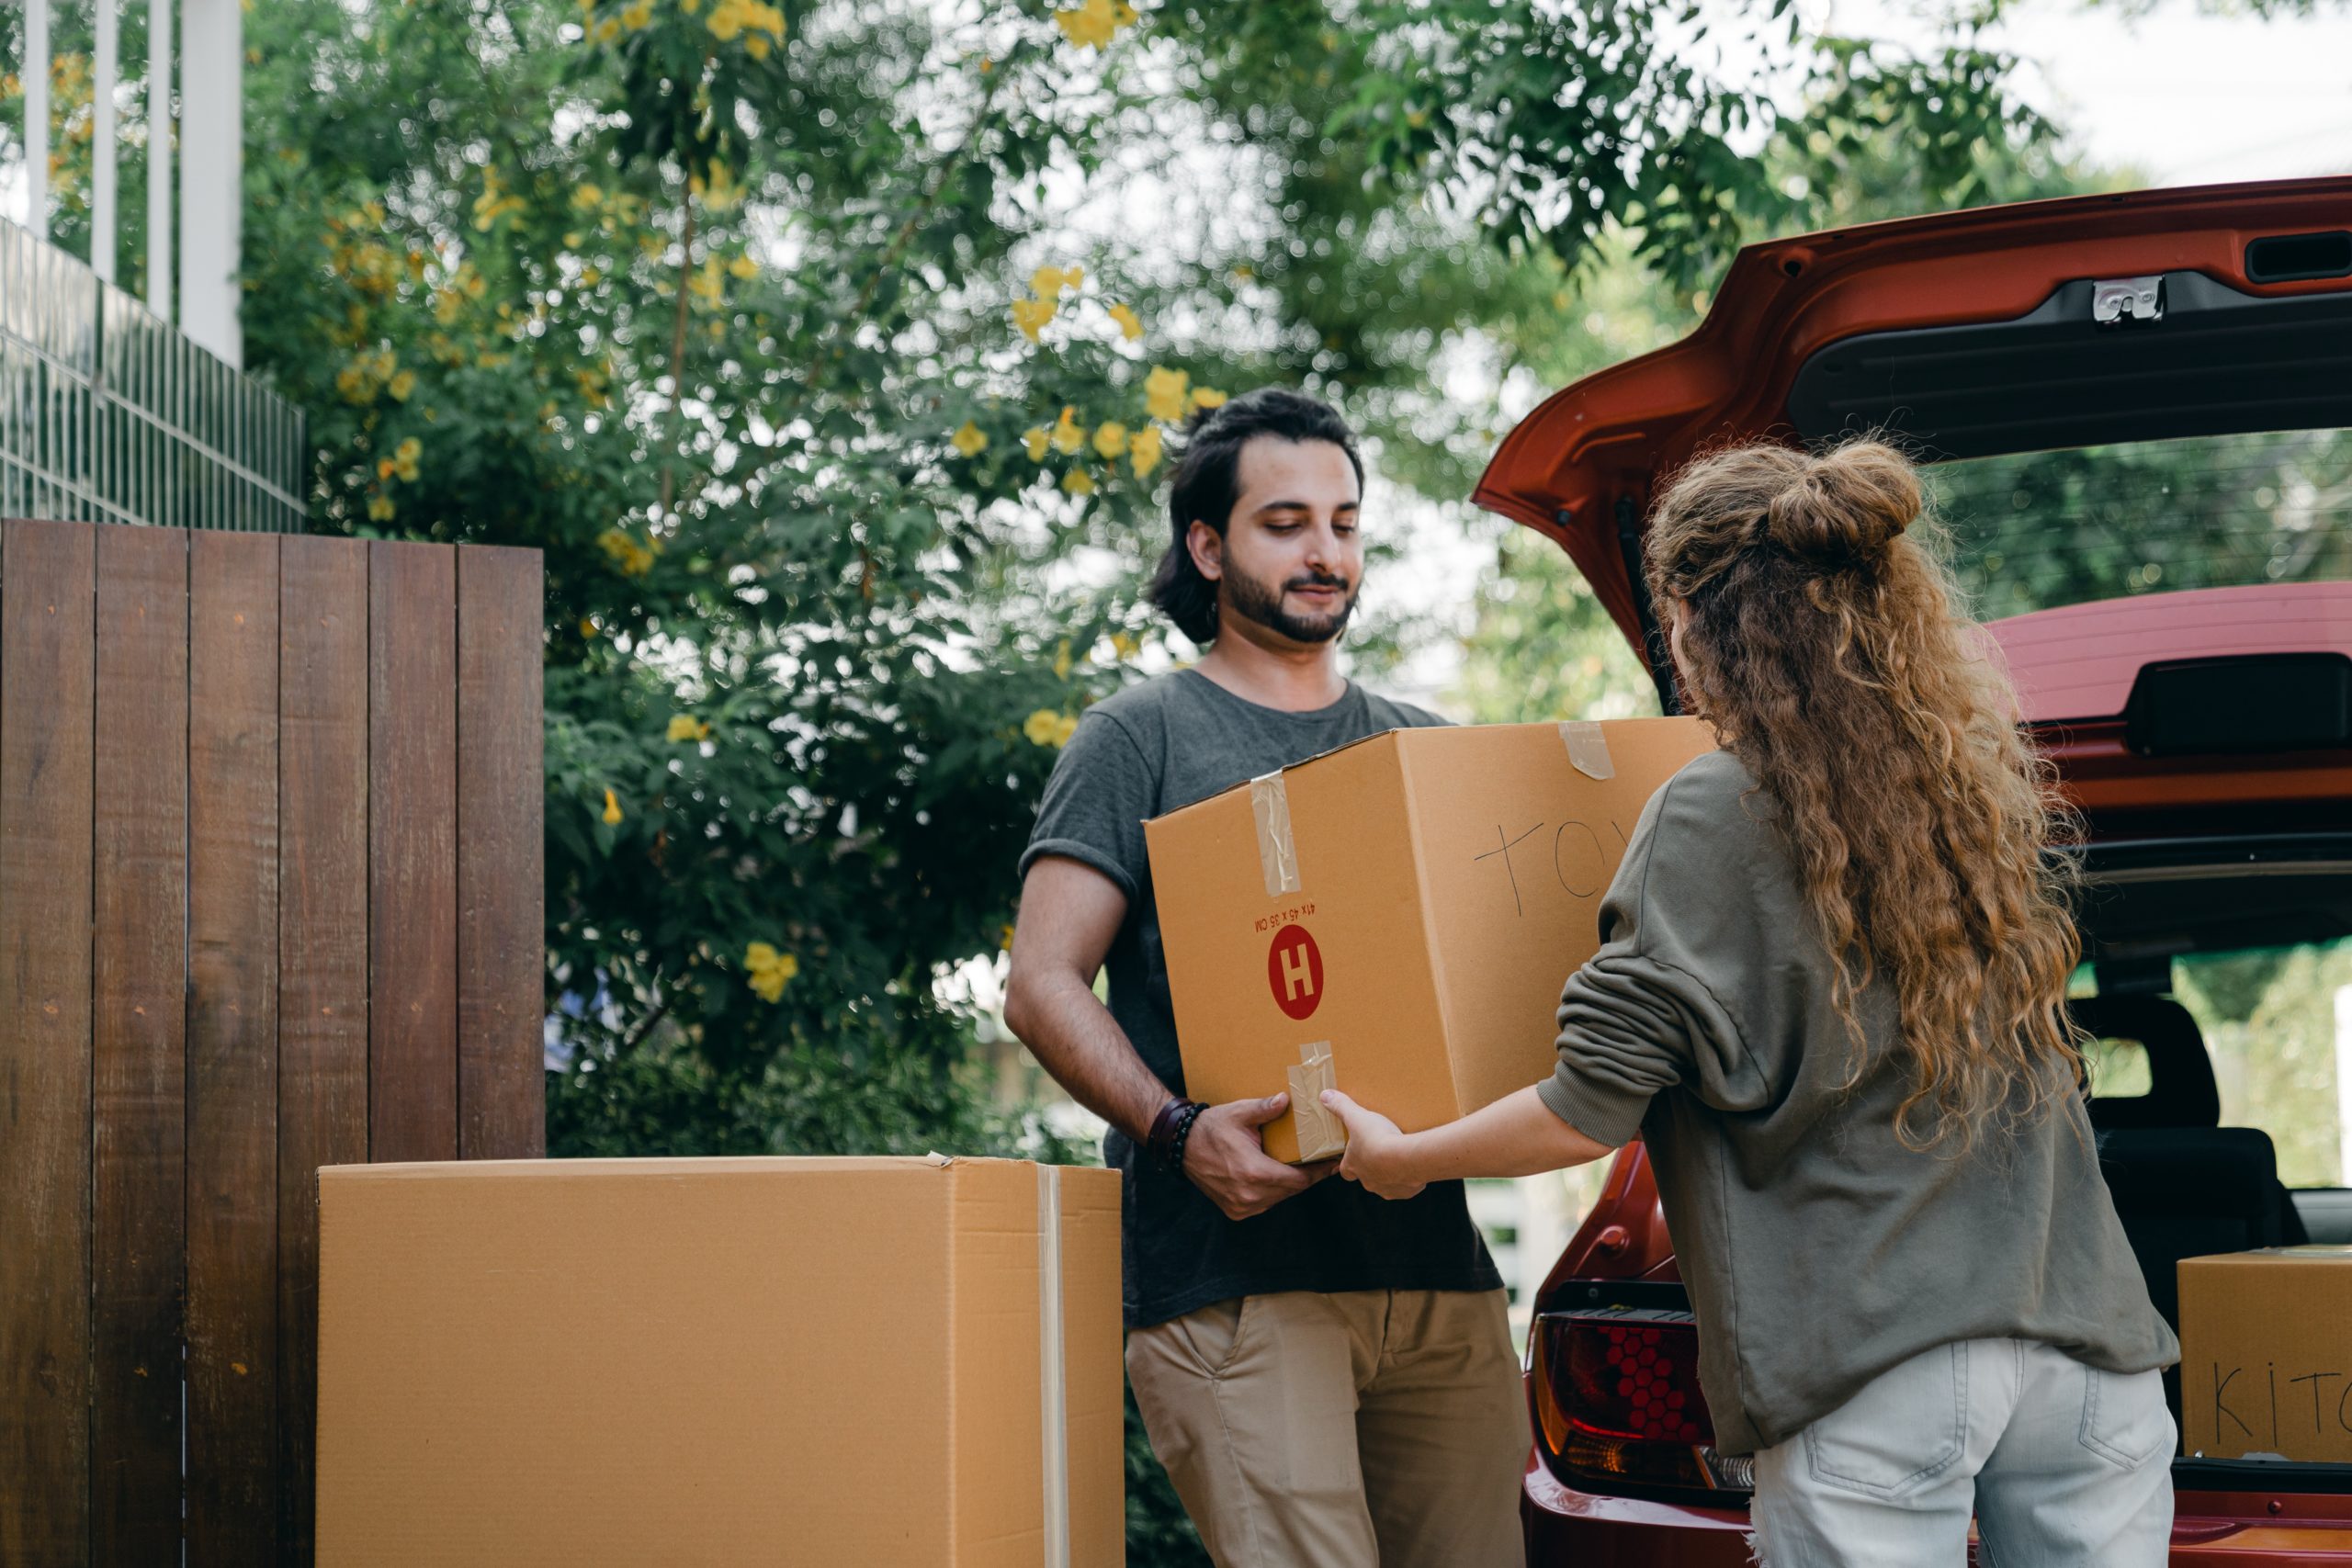 Man and woman millenial couple unloading moving boxes from a car.